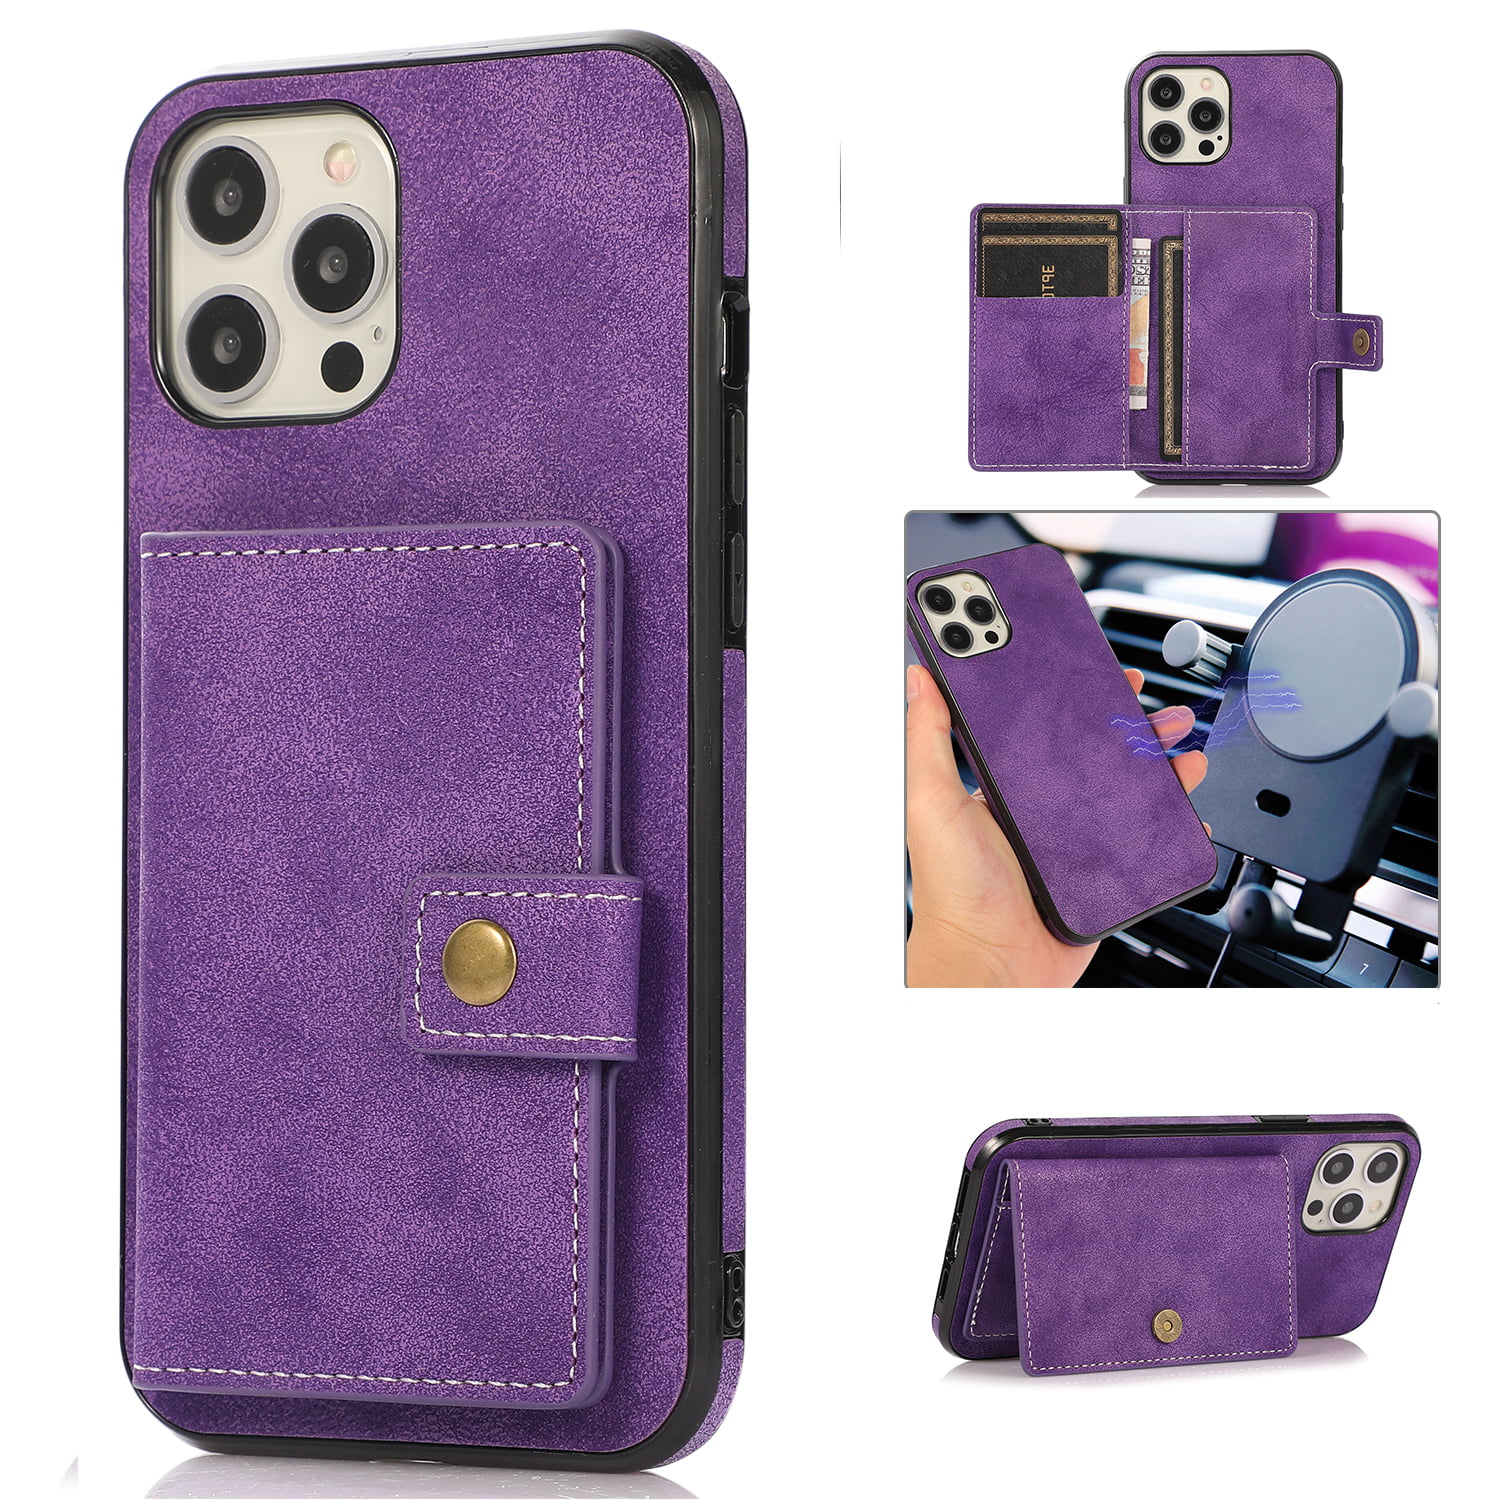 Huawei P20 lite Flip Case Leather Card Holders Kickstand Extra-Shockproof Business Wallet case with Free Waterproof-Bag Cover for Huawei P20 lite 2019 2019 